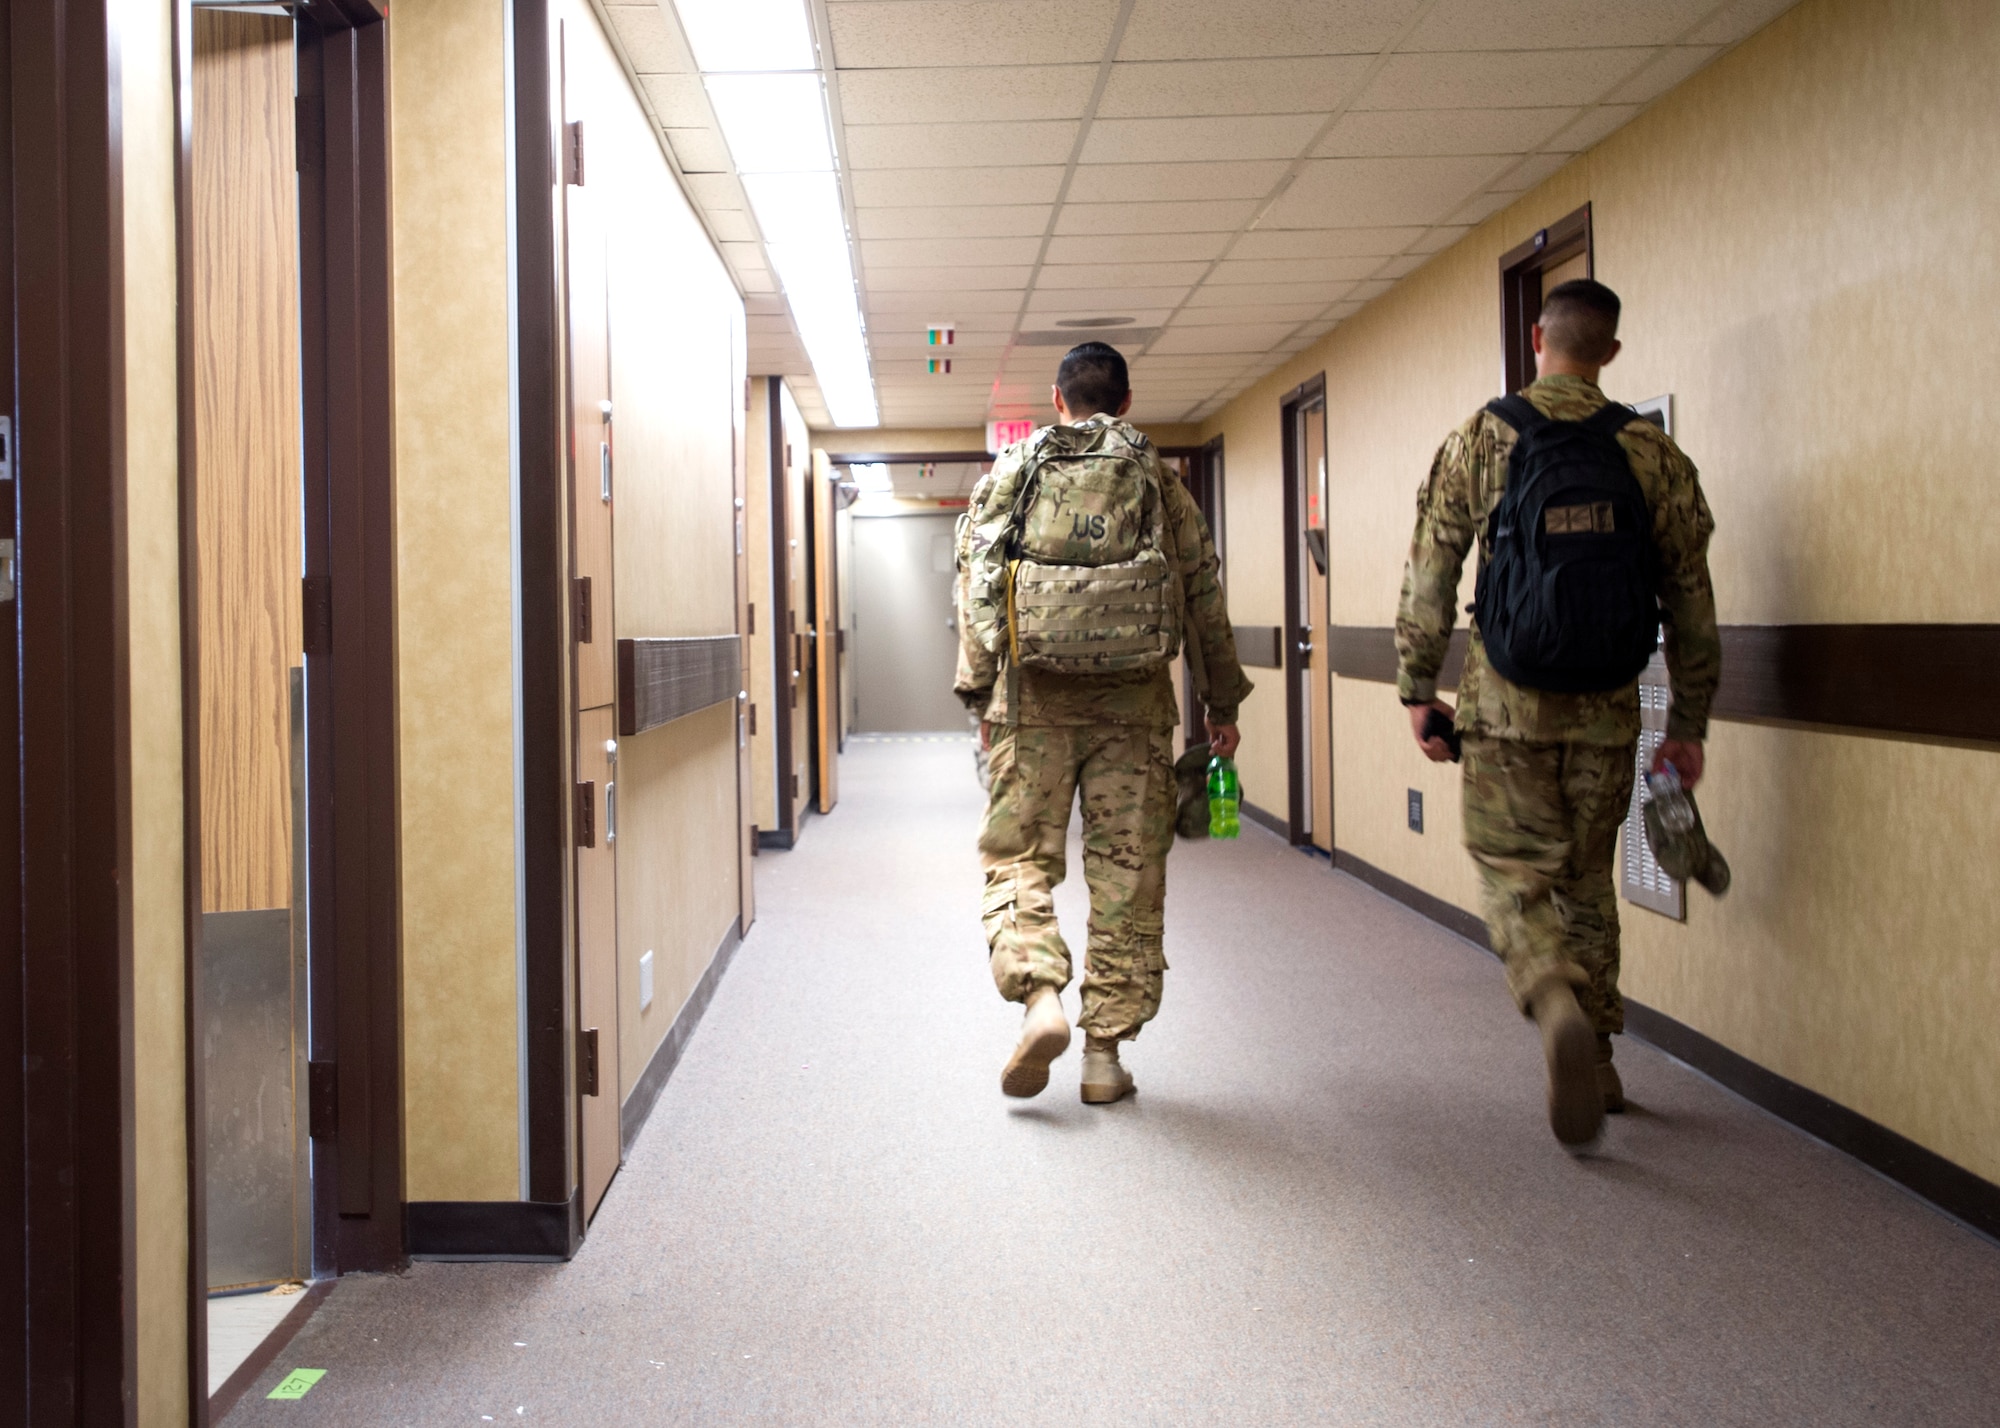 Soldiers walk to their assigned rooms on Sept. 2, at the old Wilford Hall Ambulatory Surgical Center on Joint Base San Antonio-Lackland, Texas. More than 500 soldiers are awaiting future deployment instructions at the old Wilford Hall in response to the devastation caused by Hurricane Harvey. (U.S. Air Force photo/Staff Sgt. Kevin Iinuma)